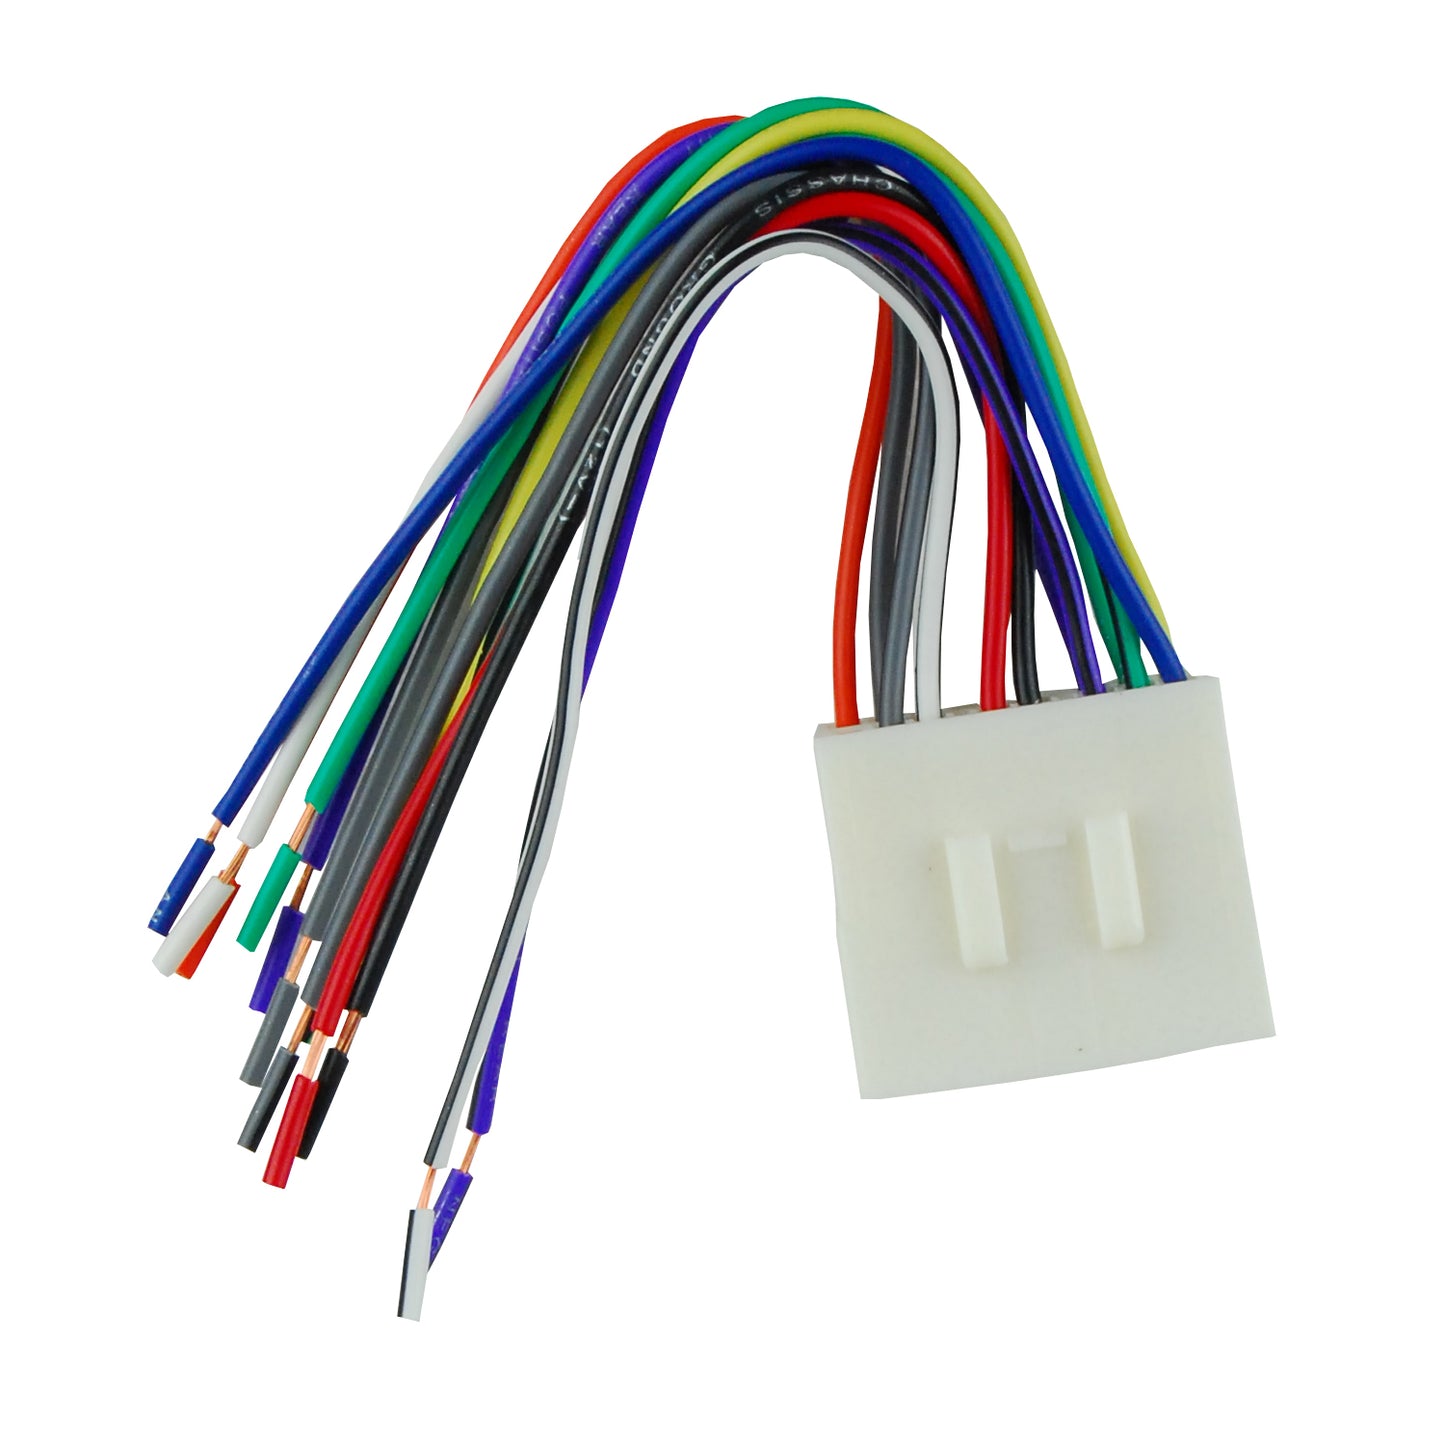 WH-SUB 9010 - Wiring Harness for Subaru